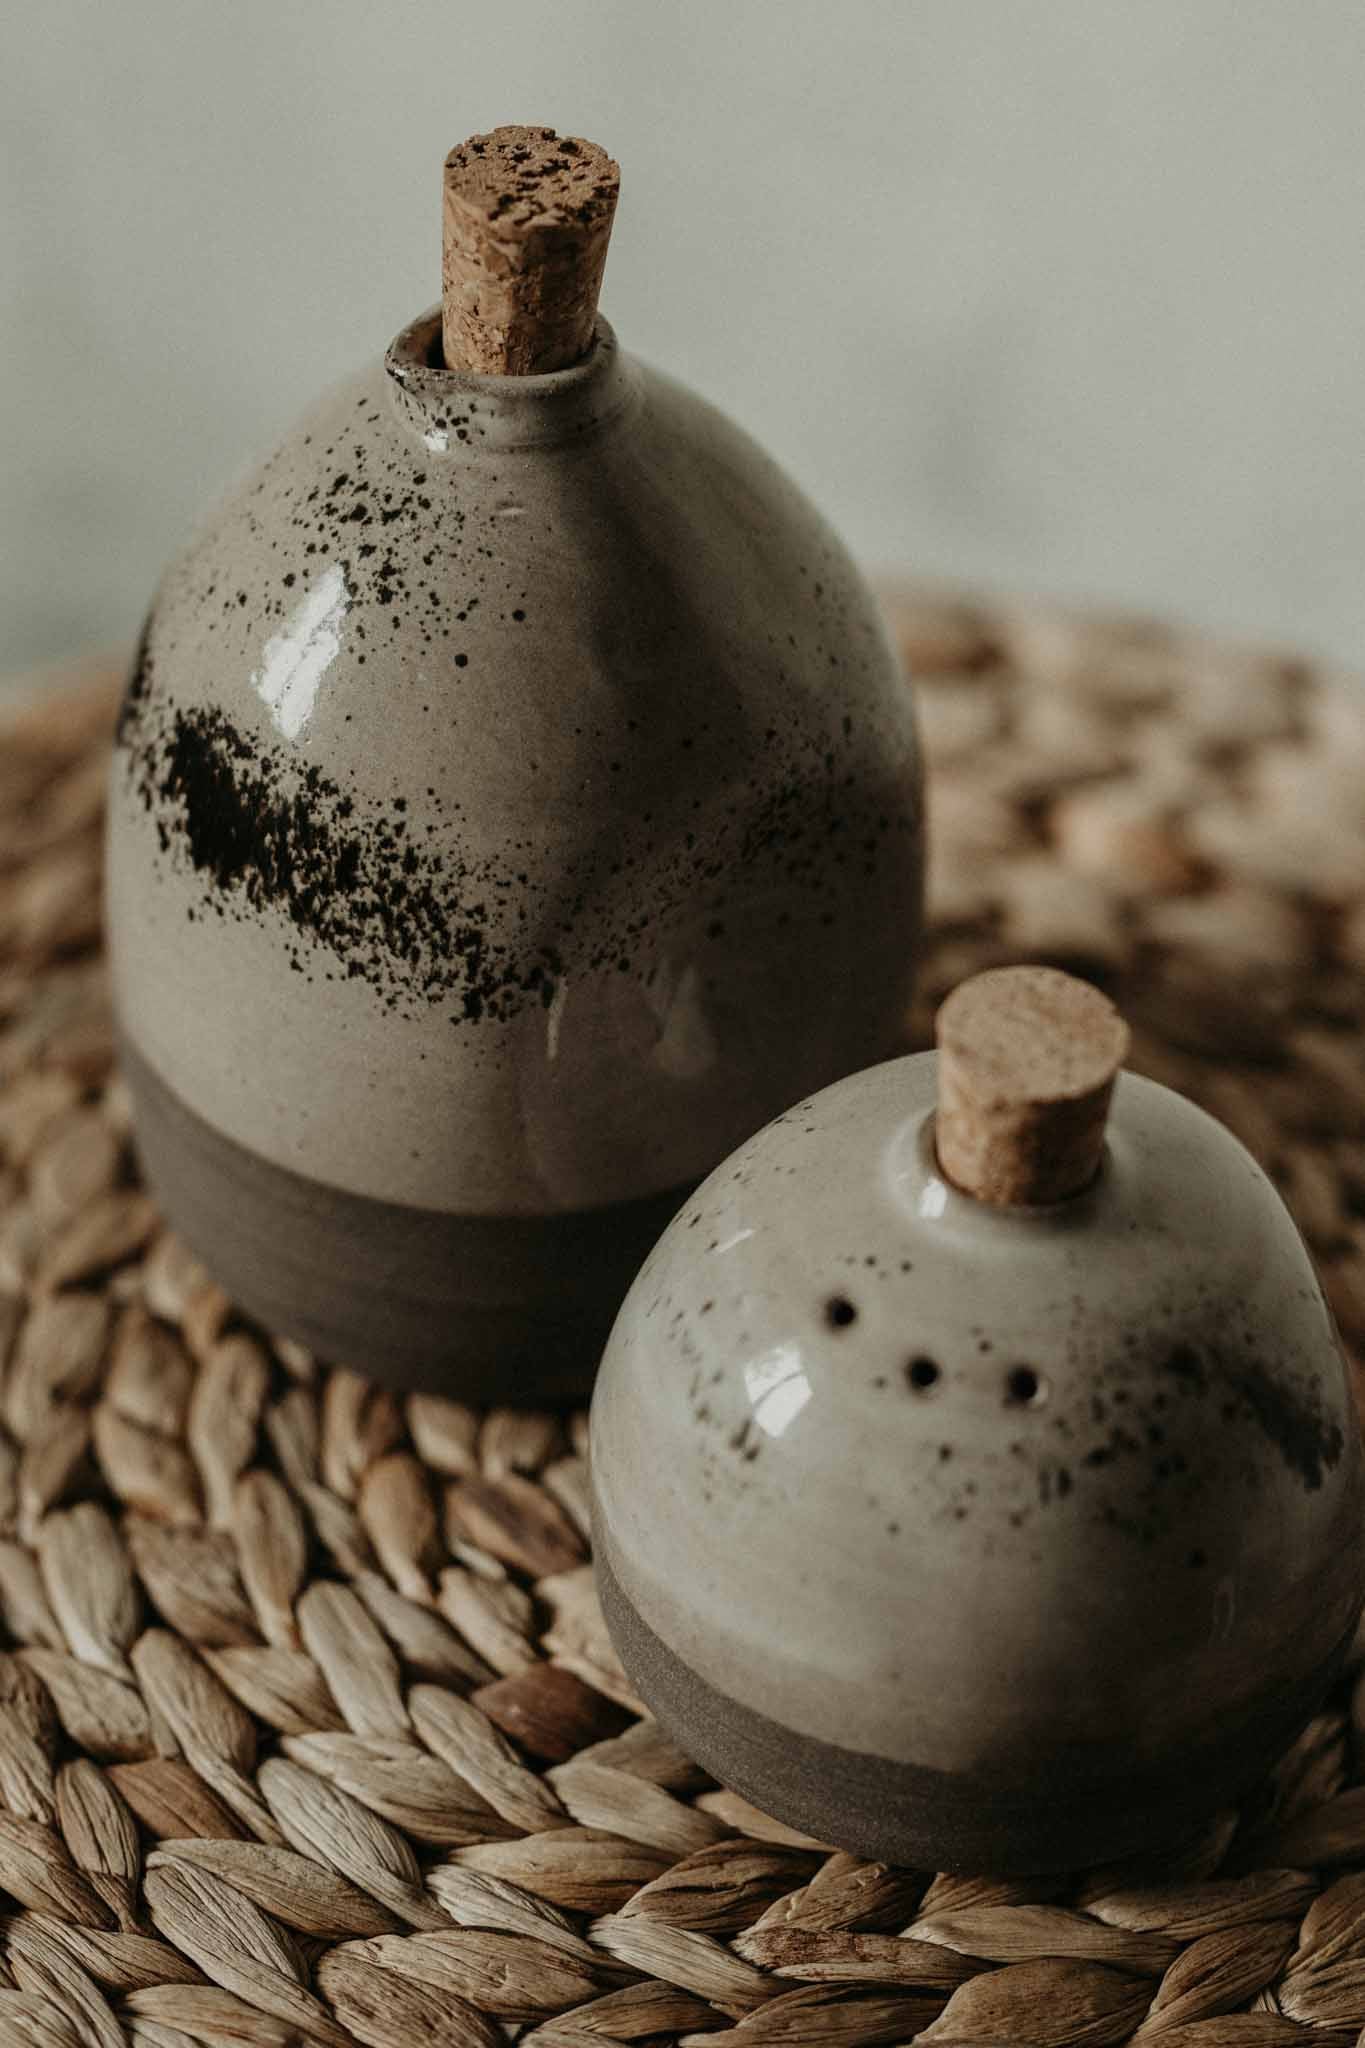 Uniquely crafted oil pourer made from stoneware pottery. Bring a new style to any kitchen with these handmade ceramic oil dispensers. Perfect for housewarming and hostess gifts.